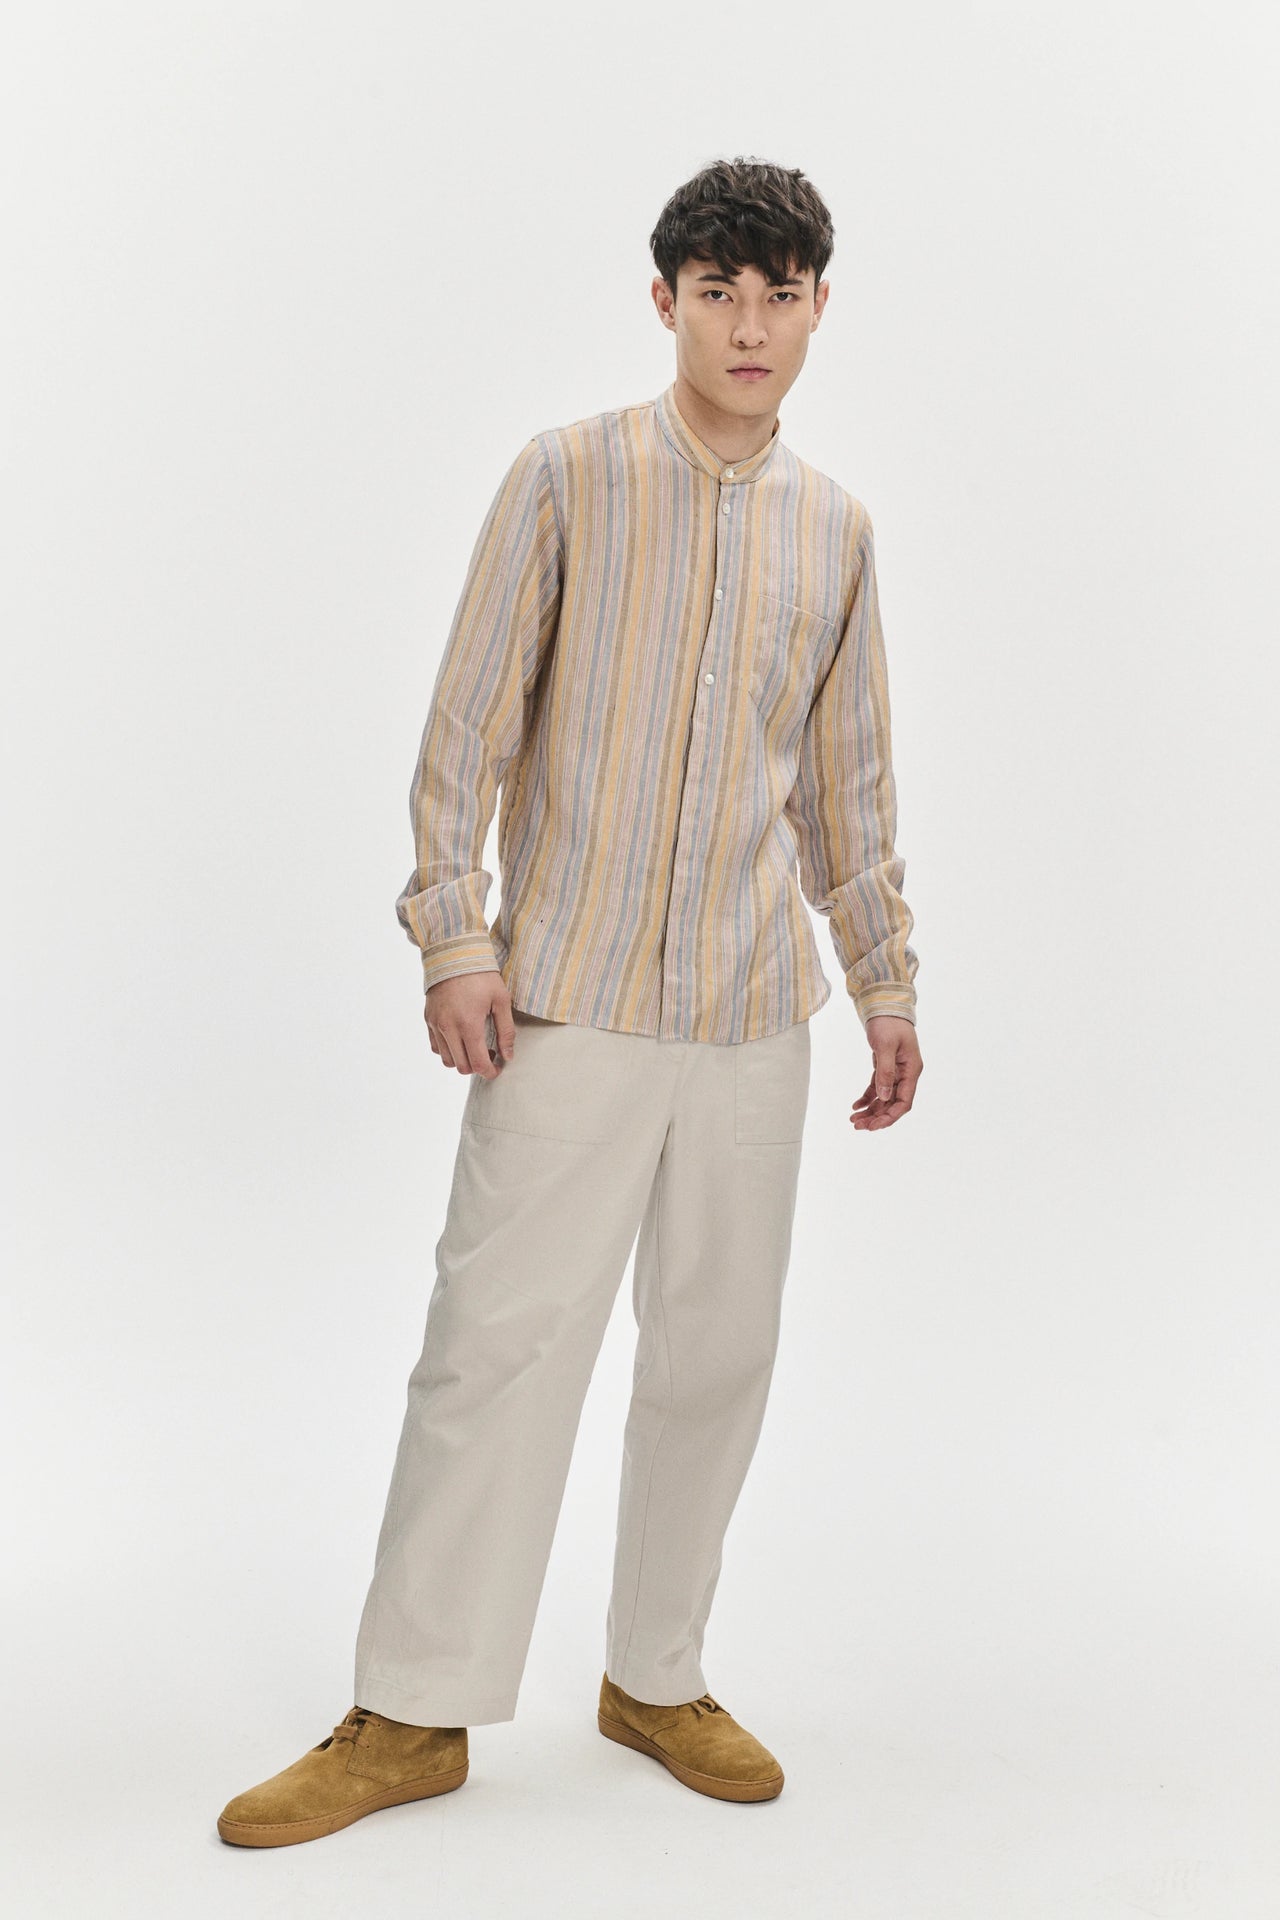 Zen Shirt in a White, Blue, Yellow, Beige, Pink and Orange Striped Portuguese Linen